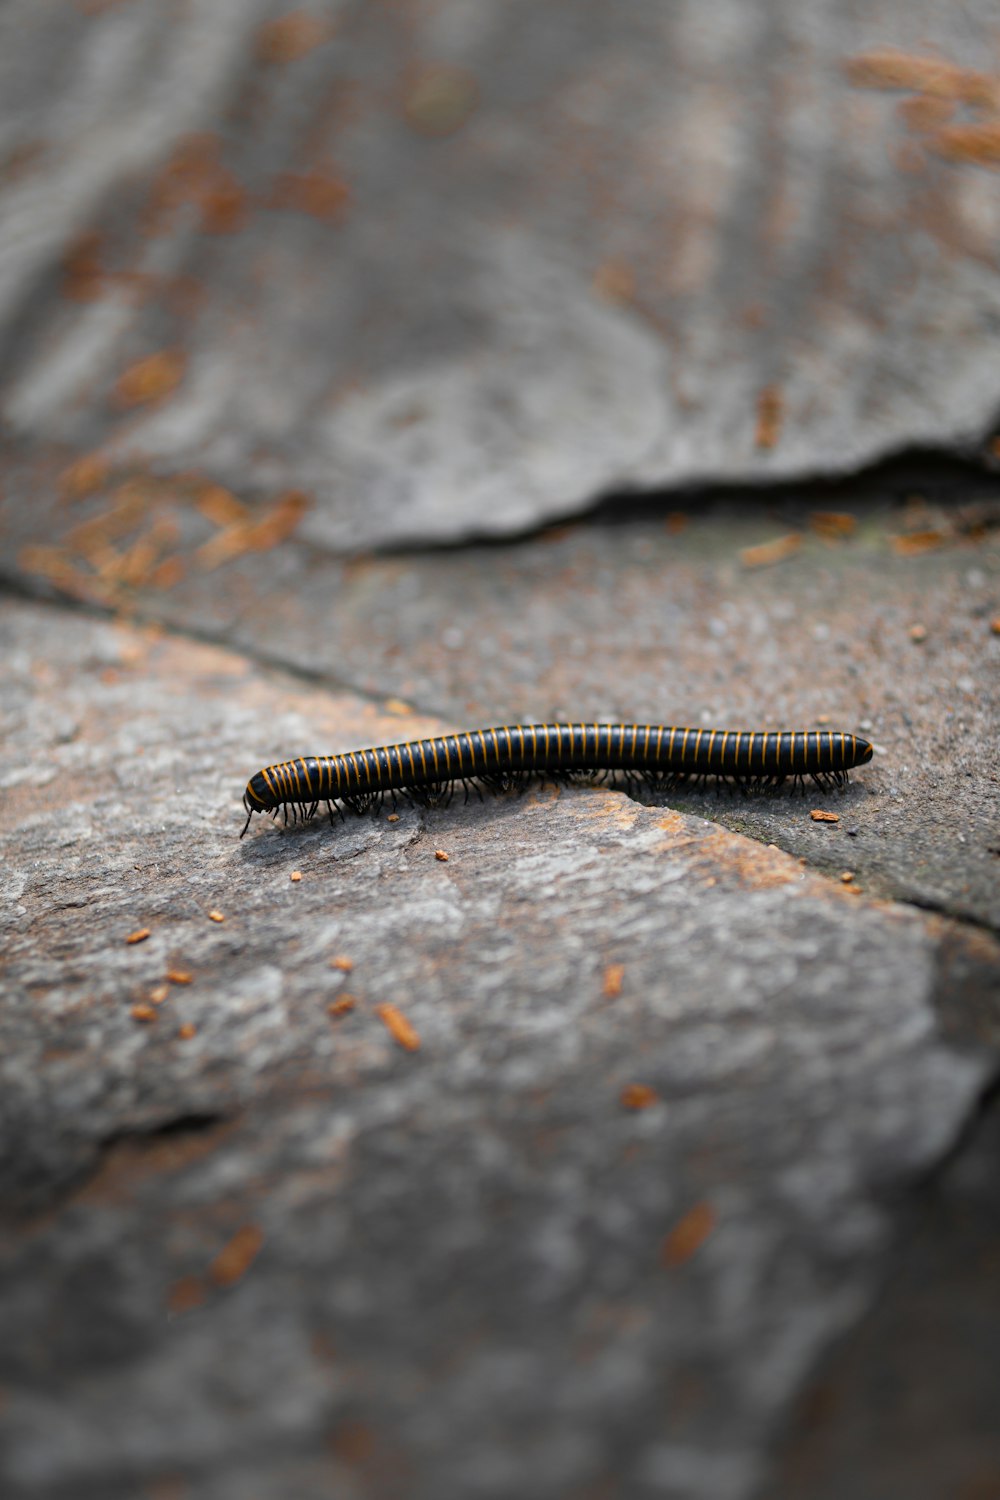 a caterpillar crawling on a stone surface